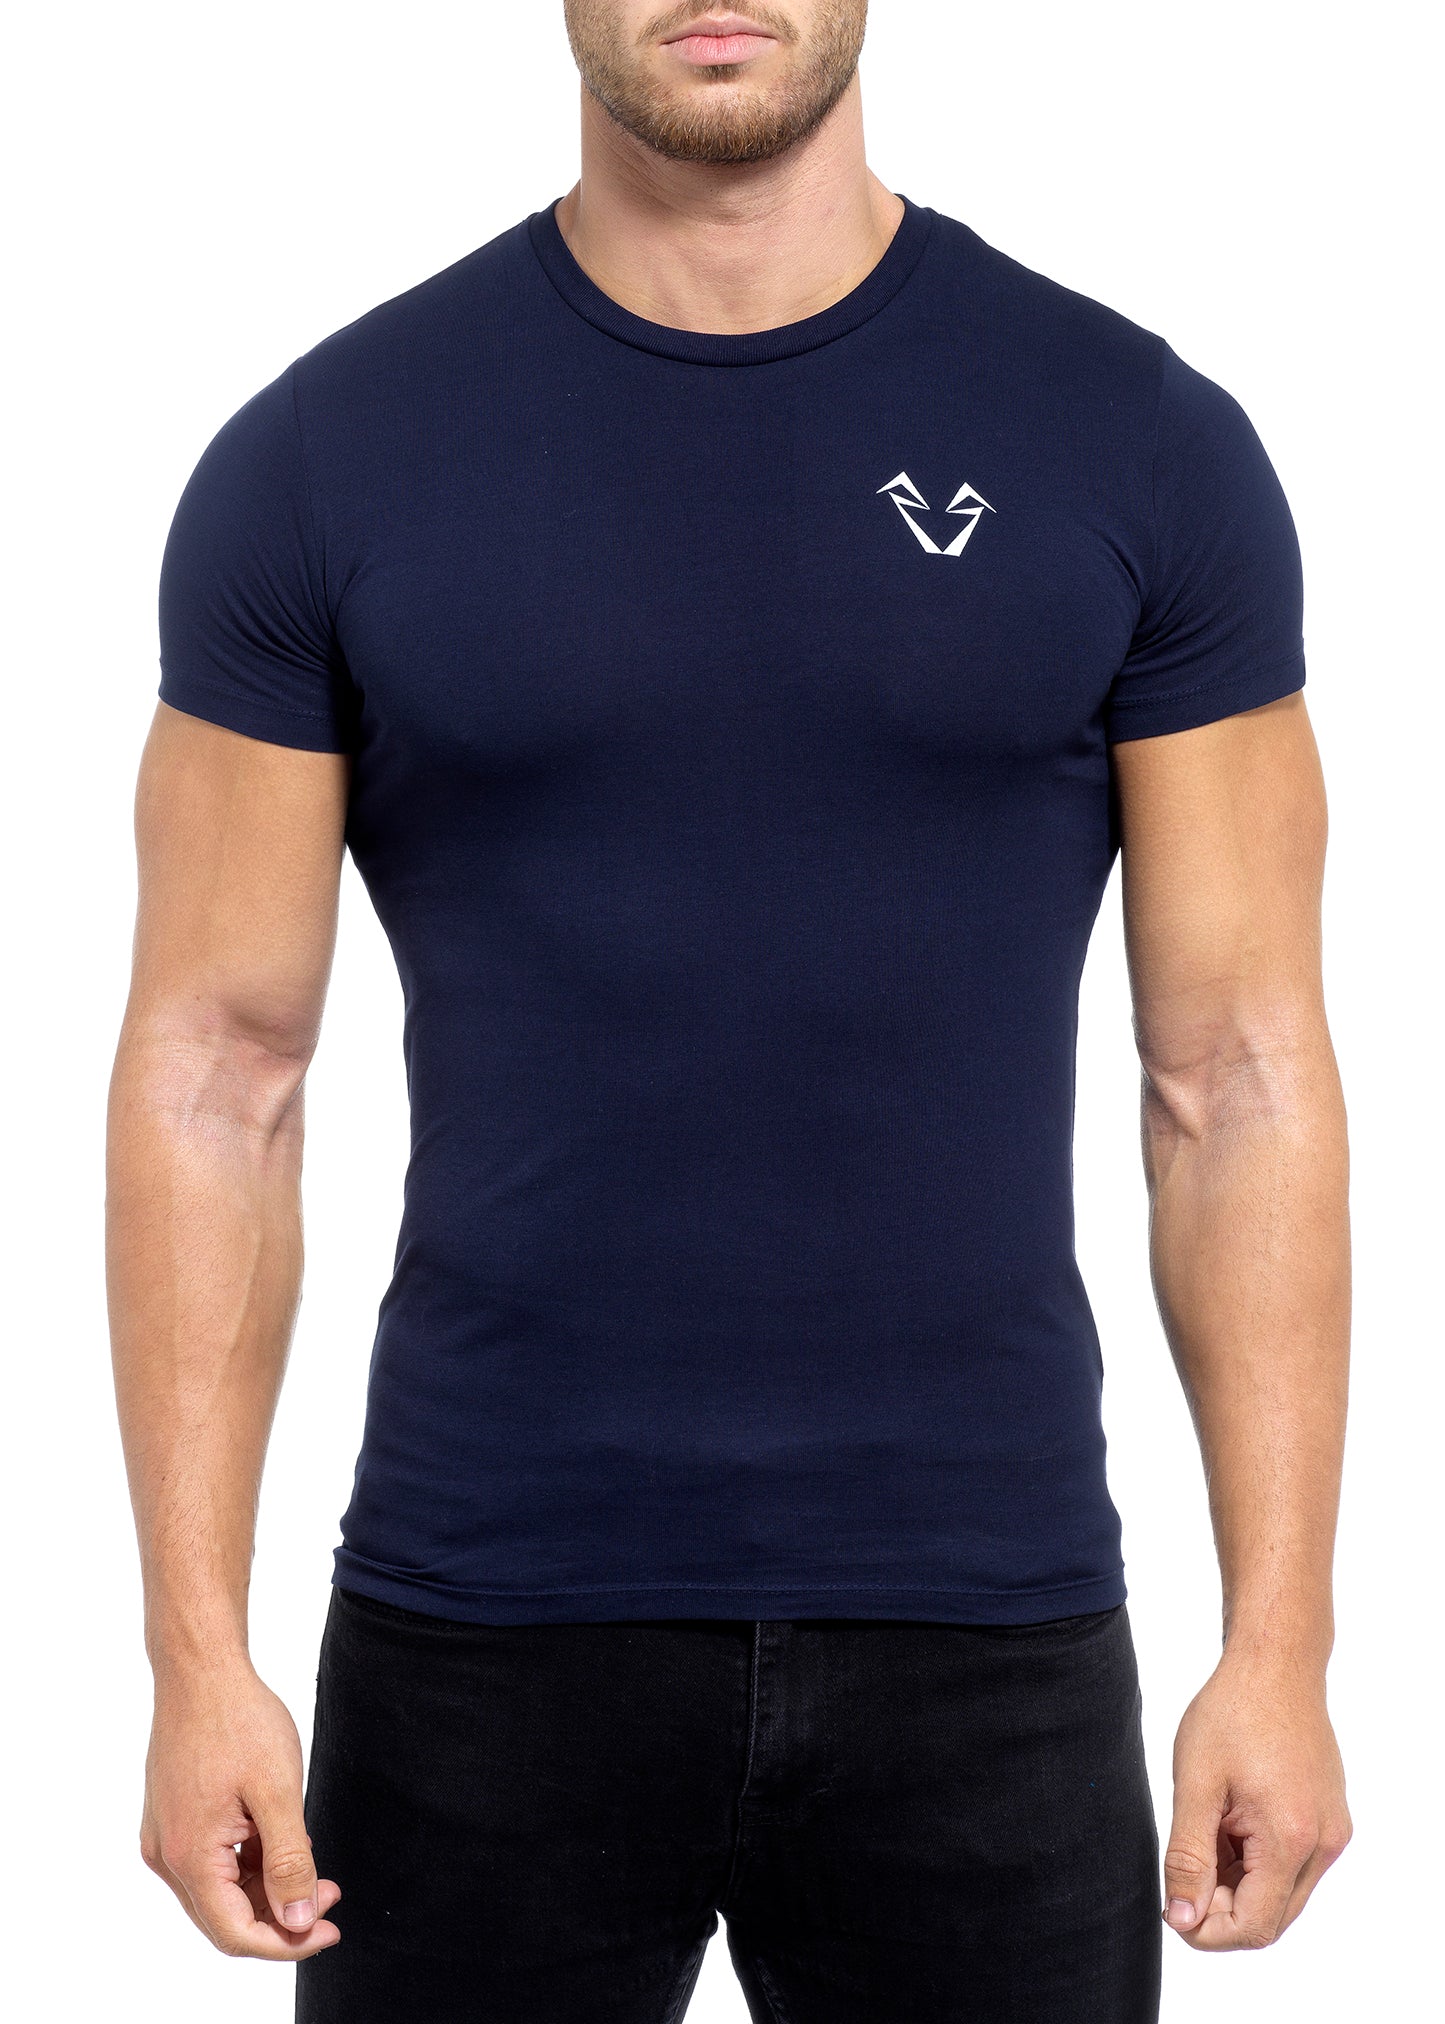 Mens Navy Muscle Fit T Shirts